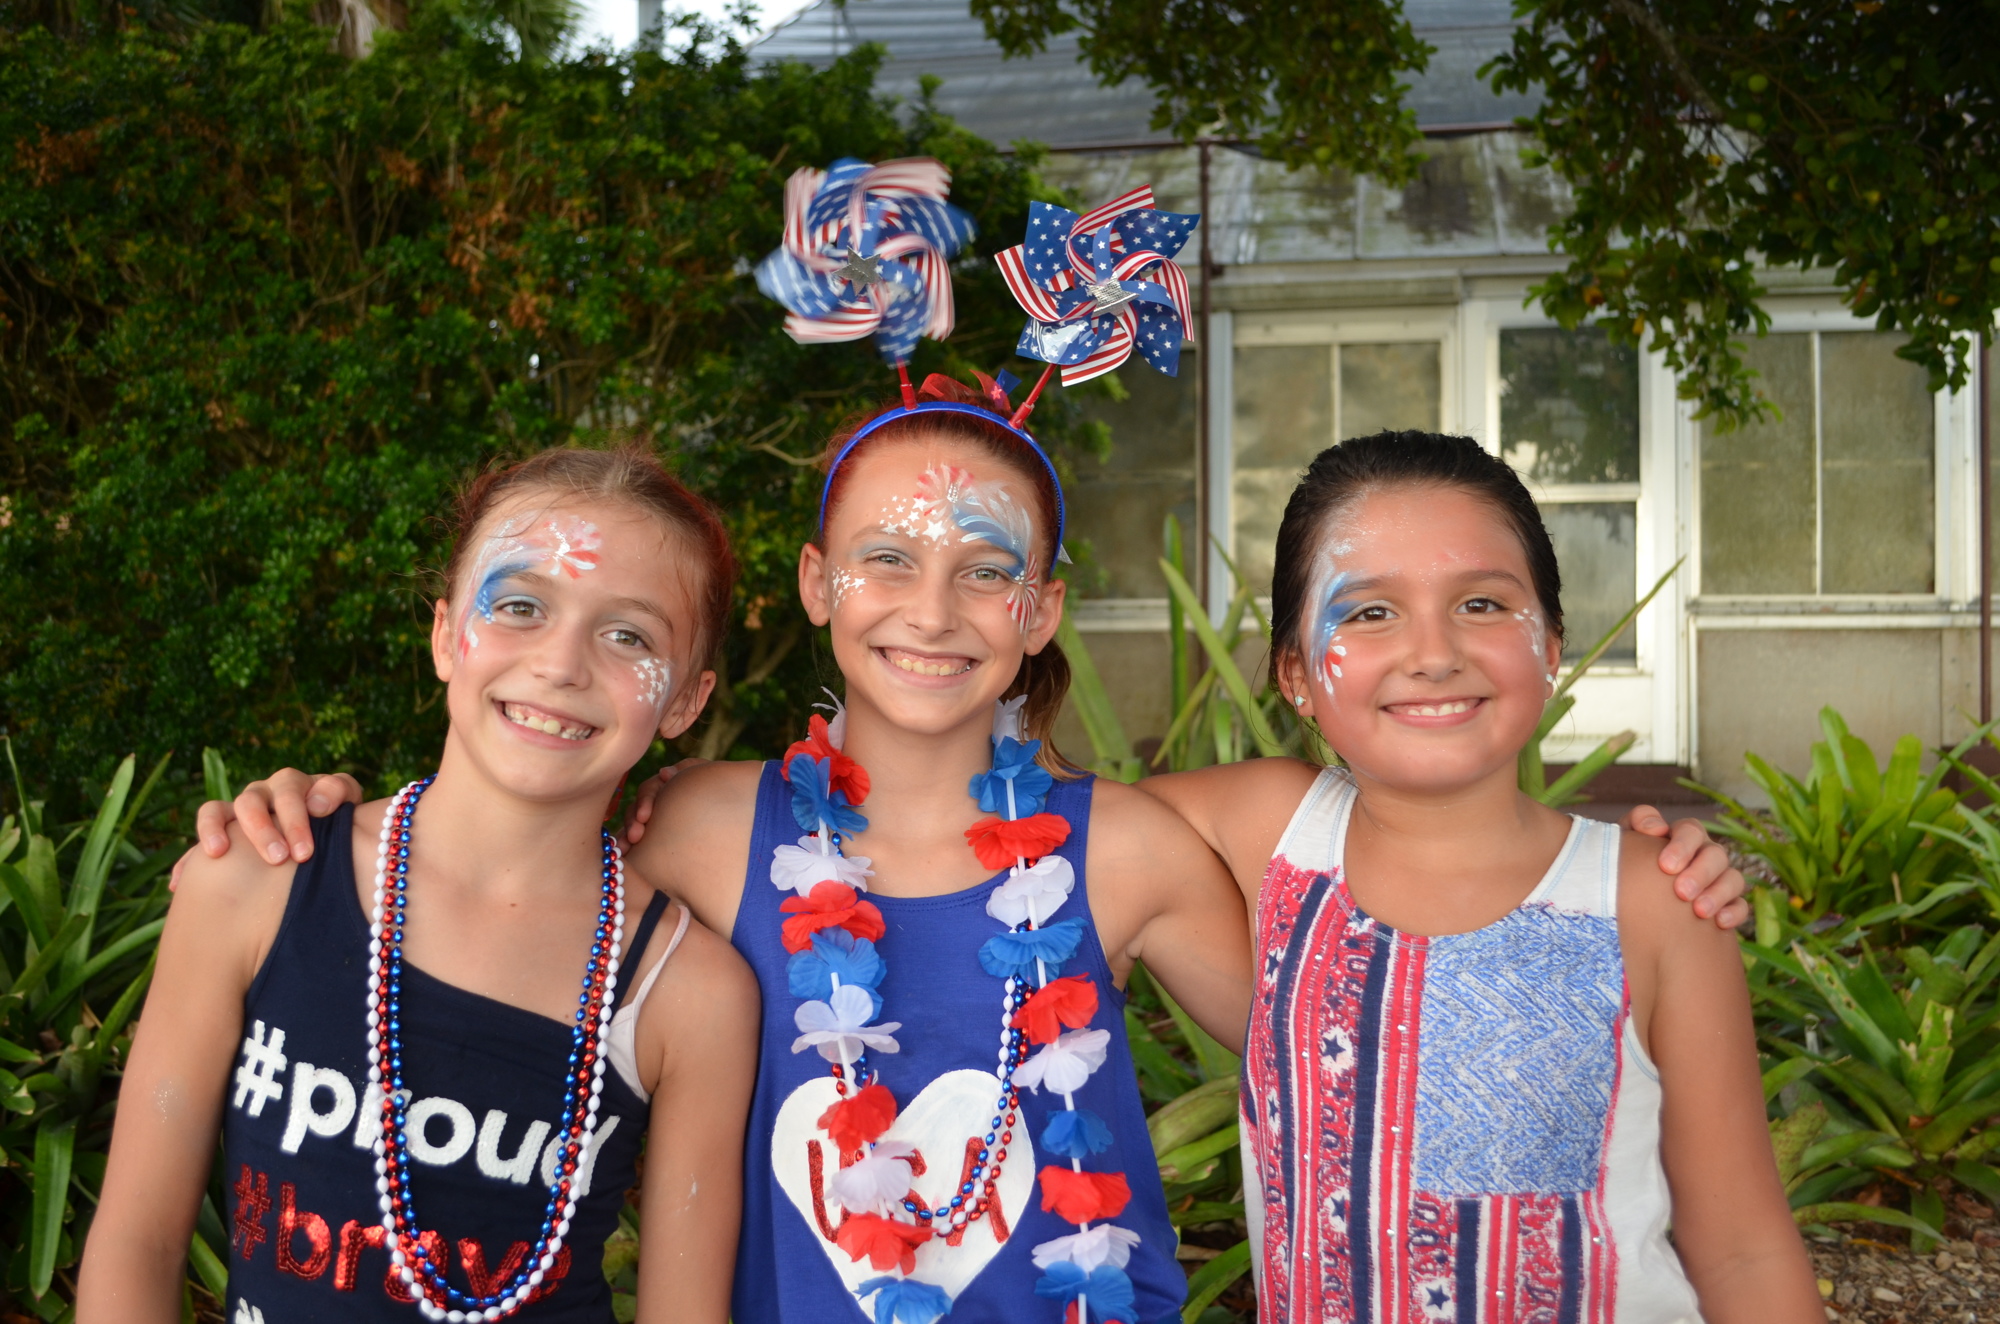 Parker Marie, Riley Marie and Savannah Torres attend the All-American Barbecue on July 4, 2016 at Marie Selby Botanical Gardens. Photo by Amanda Morales